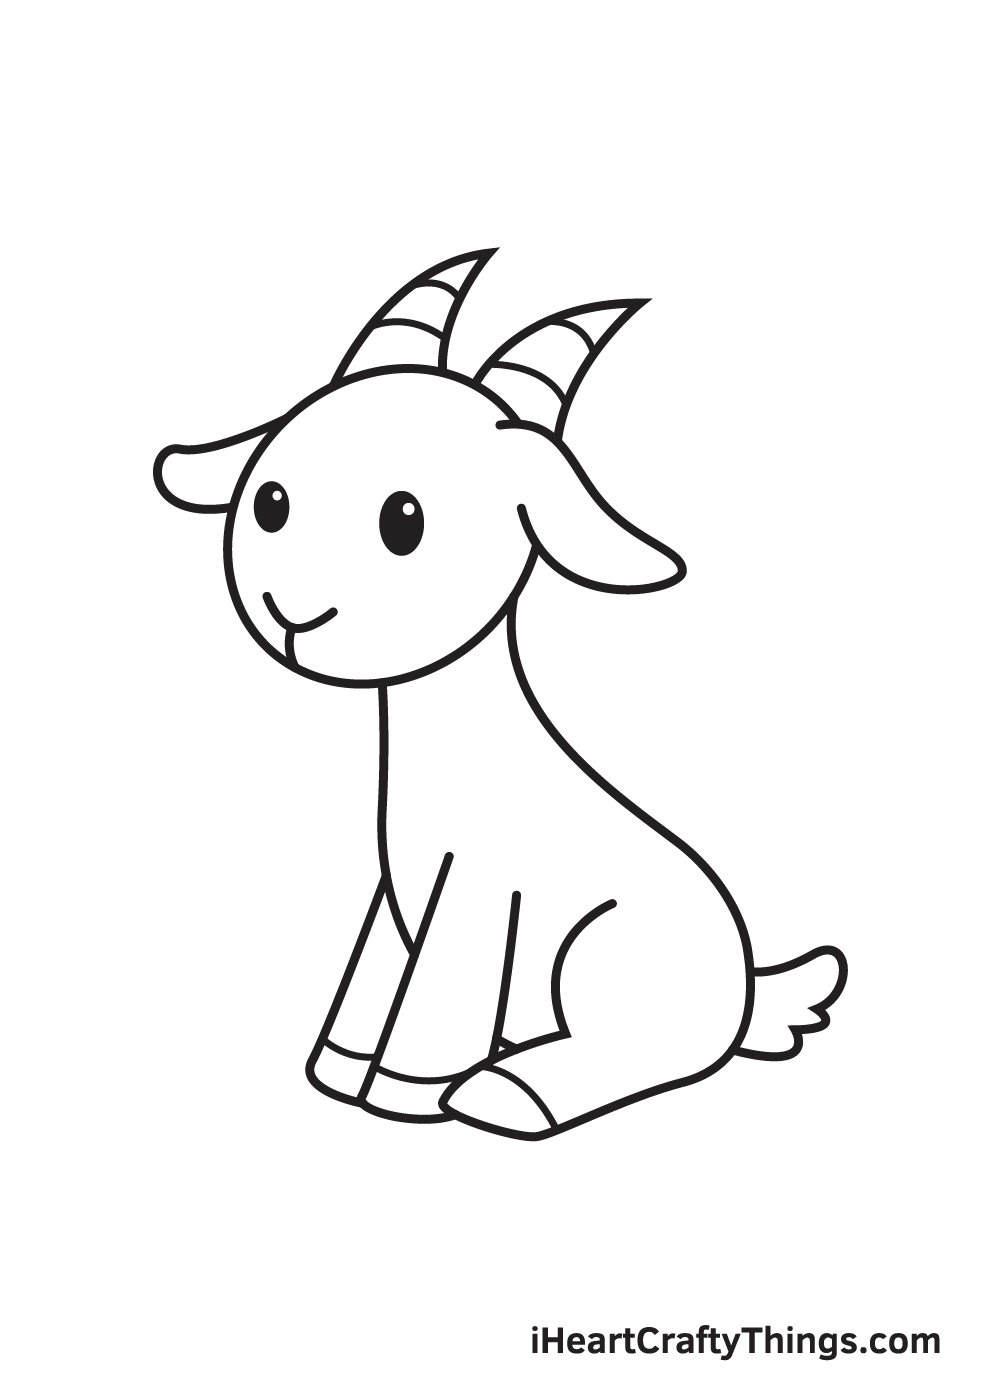 goat drawing - step 9